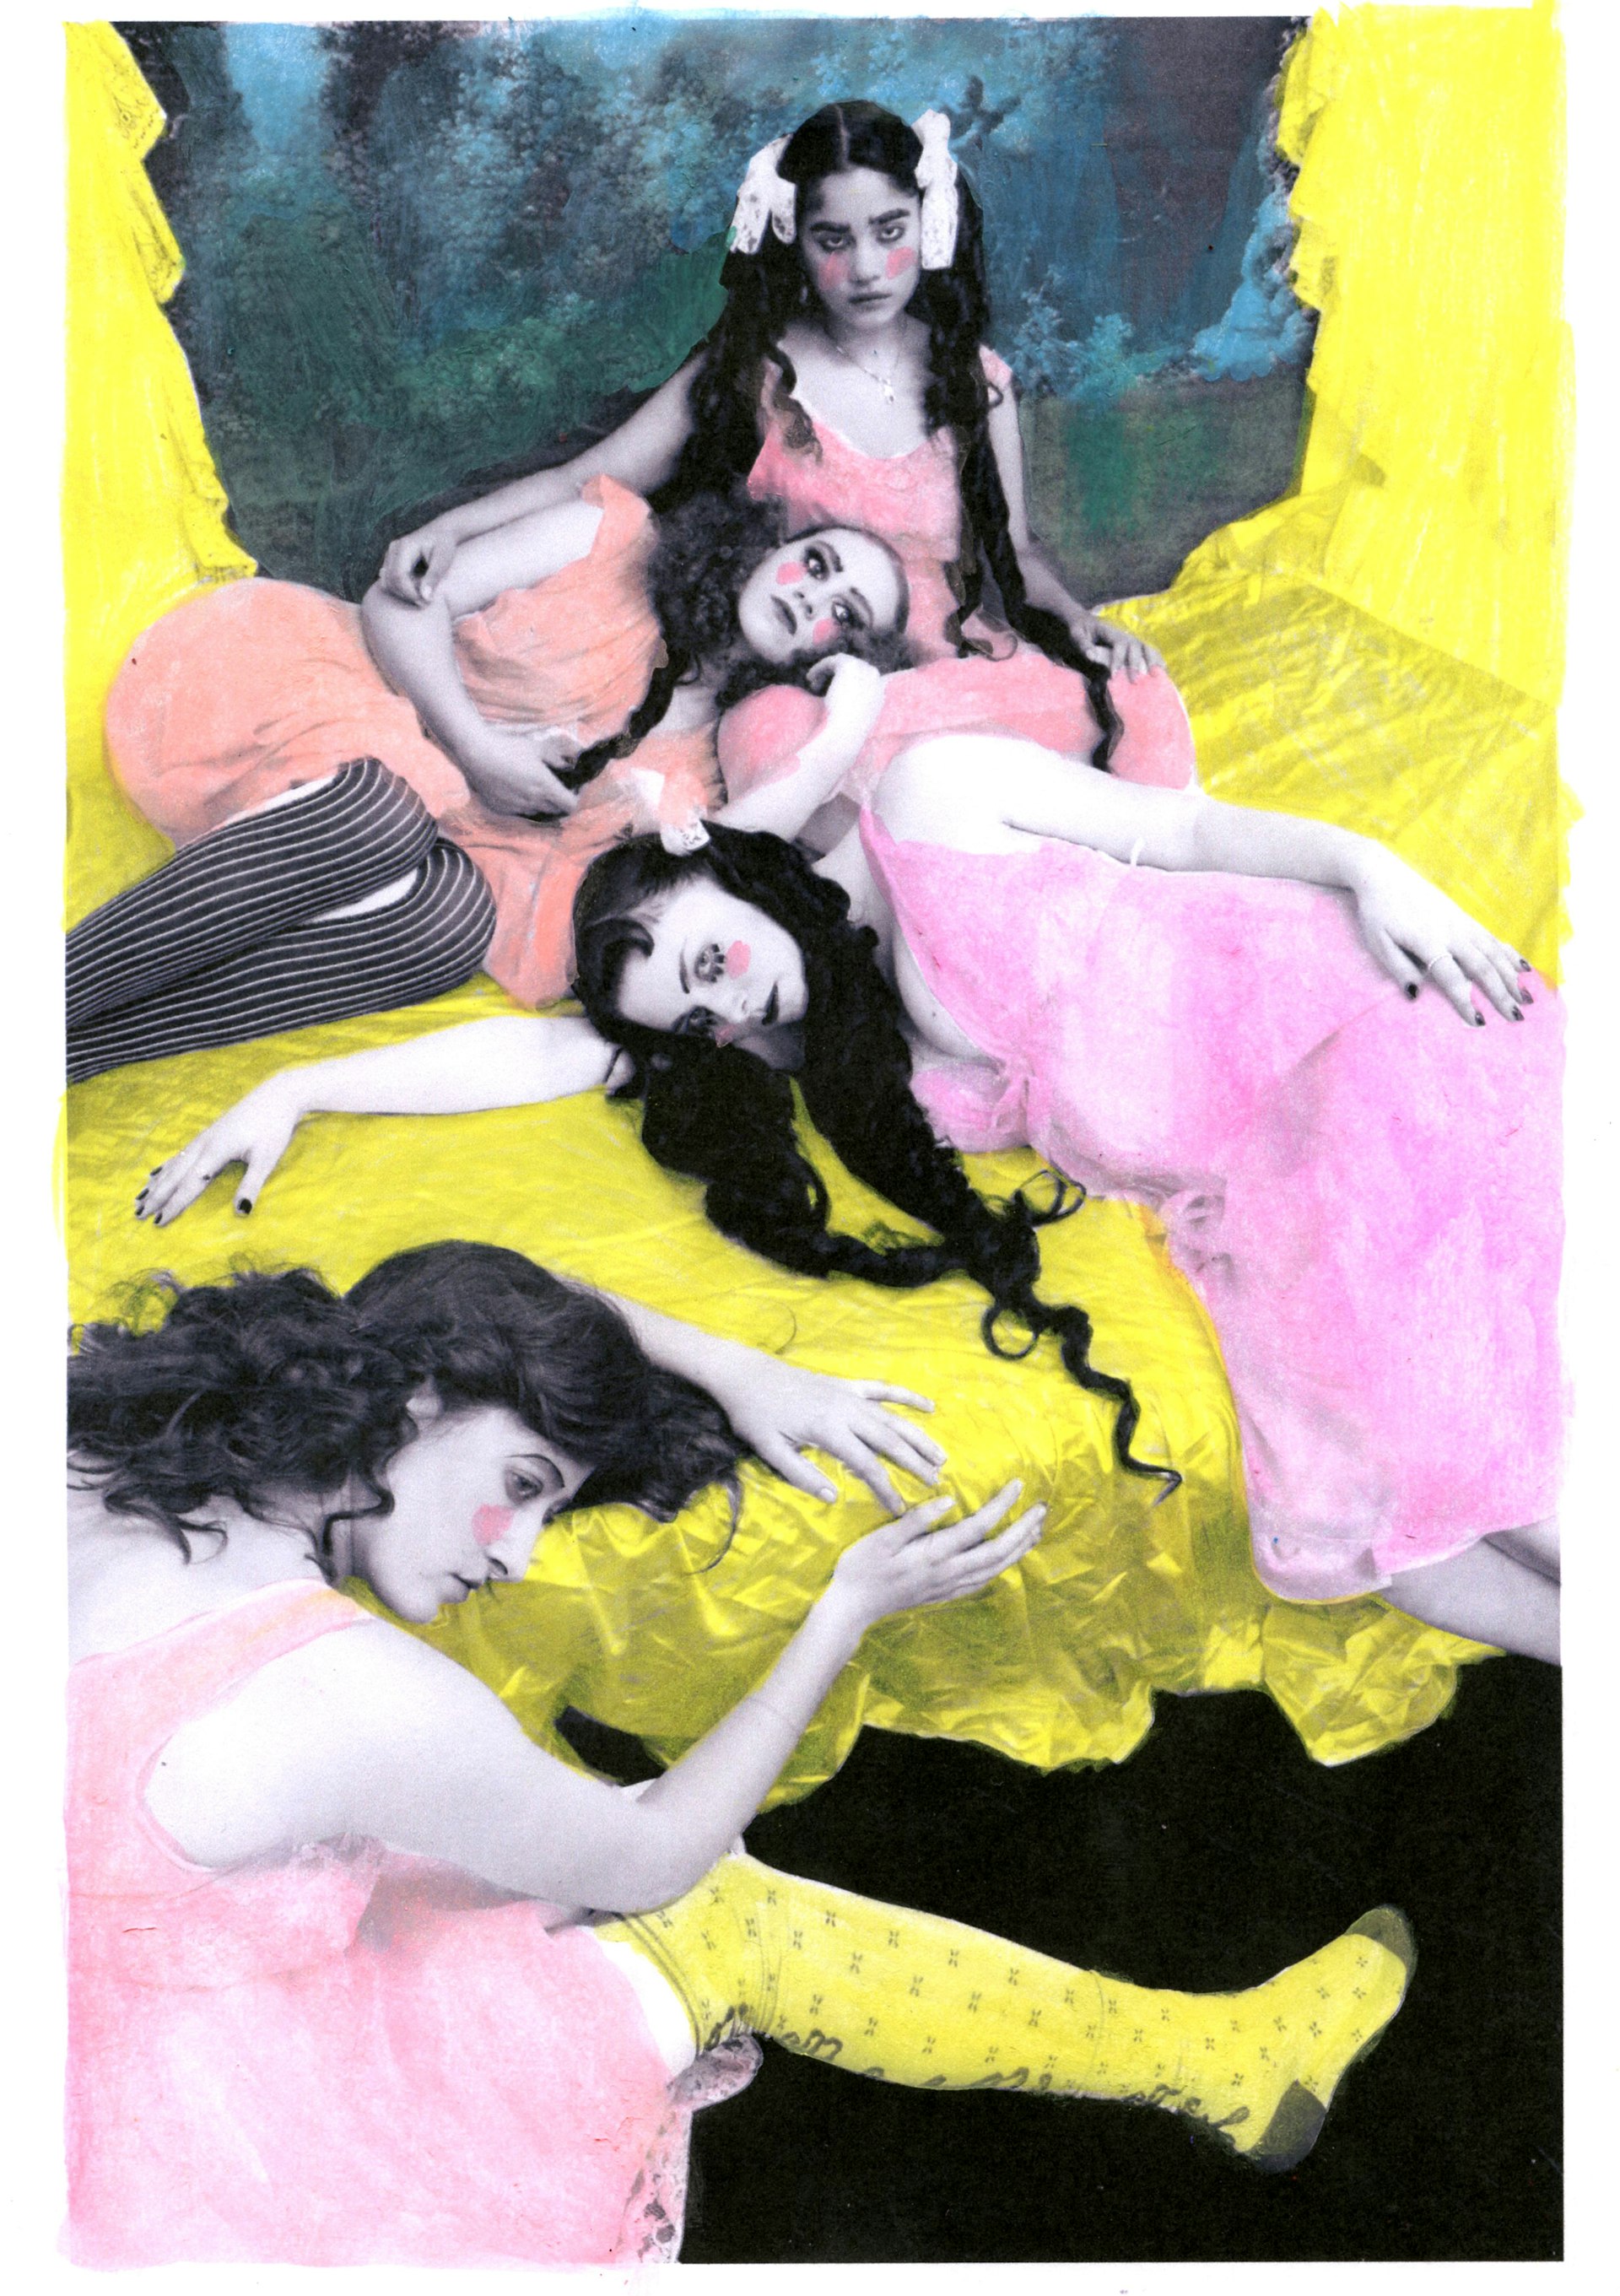 'Hysteria', by Rachel Hodgson for Polyester Daughters of Darkness